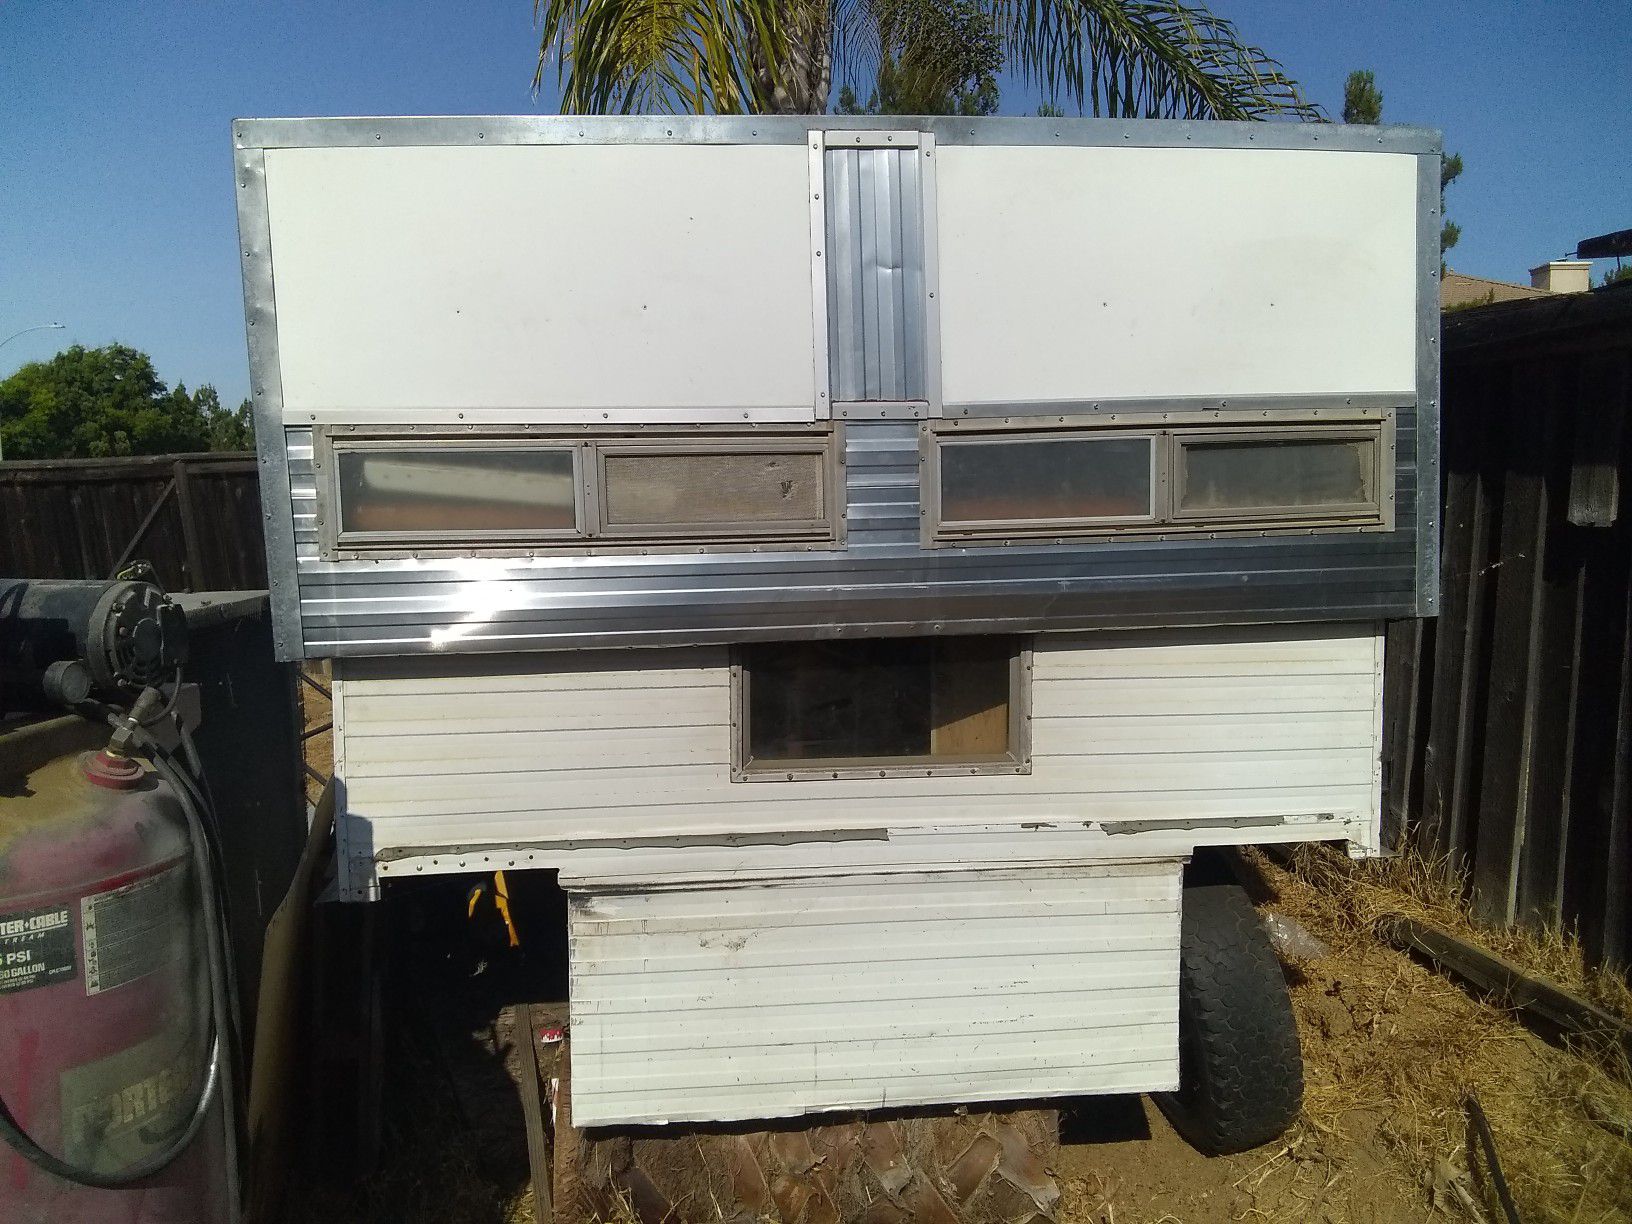 Pop-up camper nice project 8' size bed truck